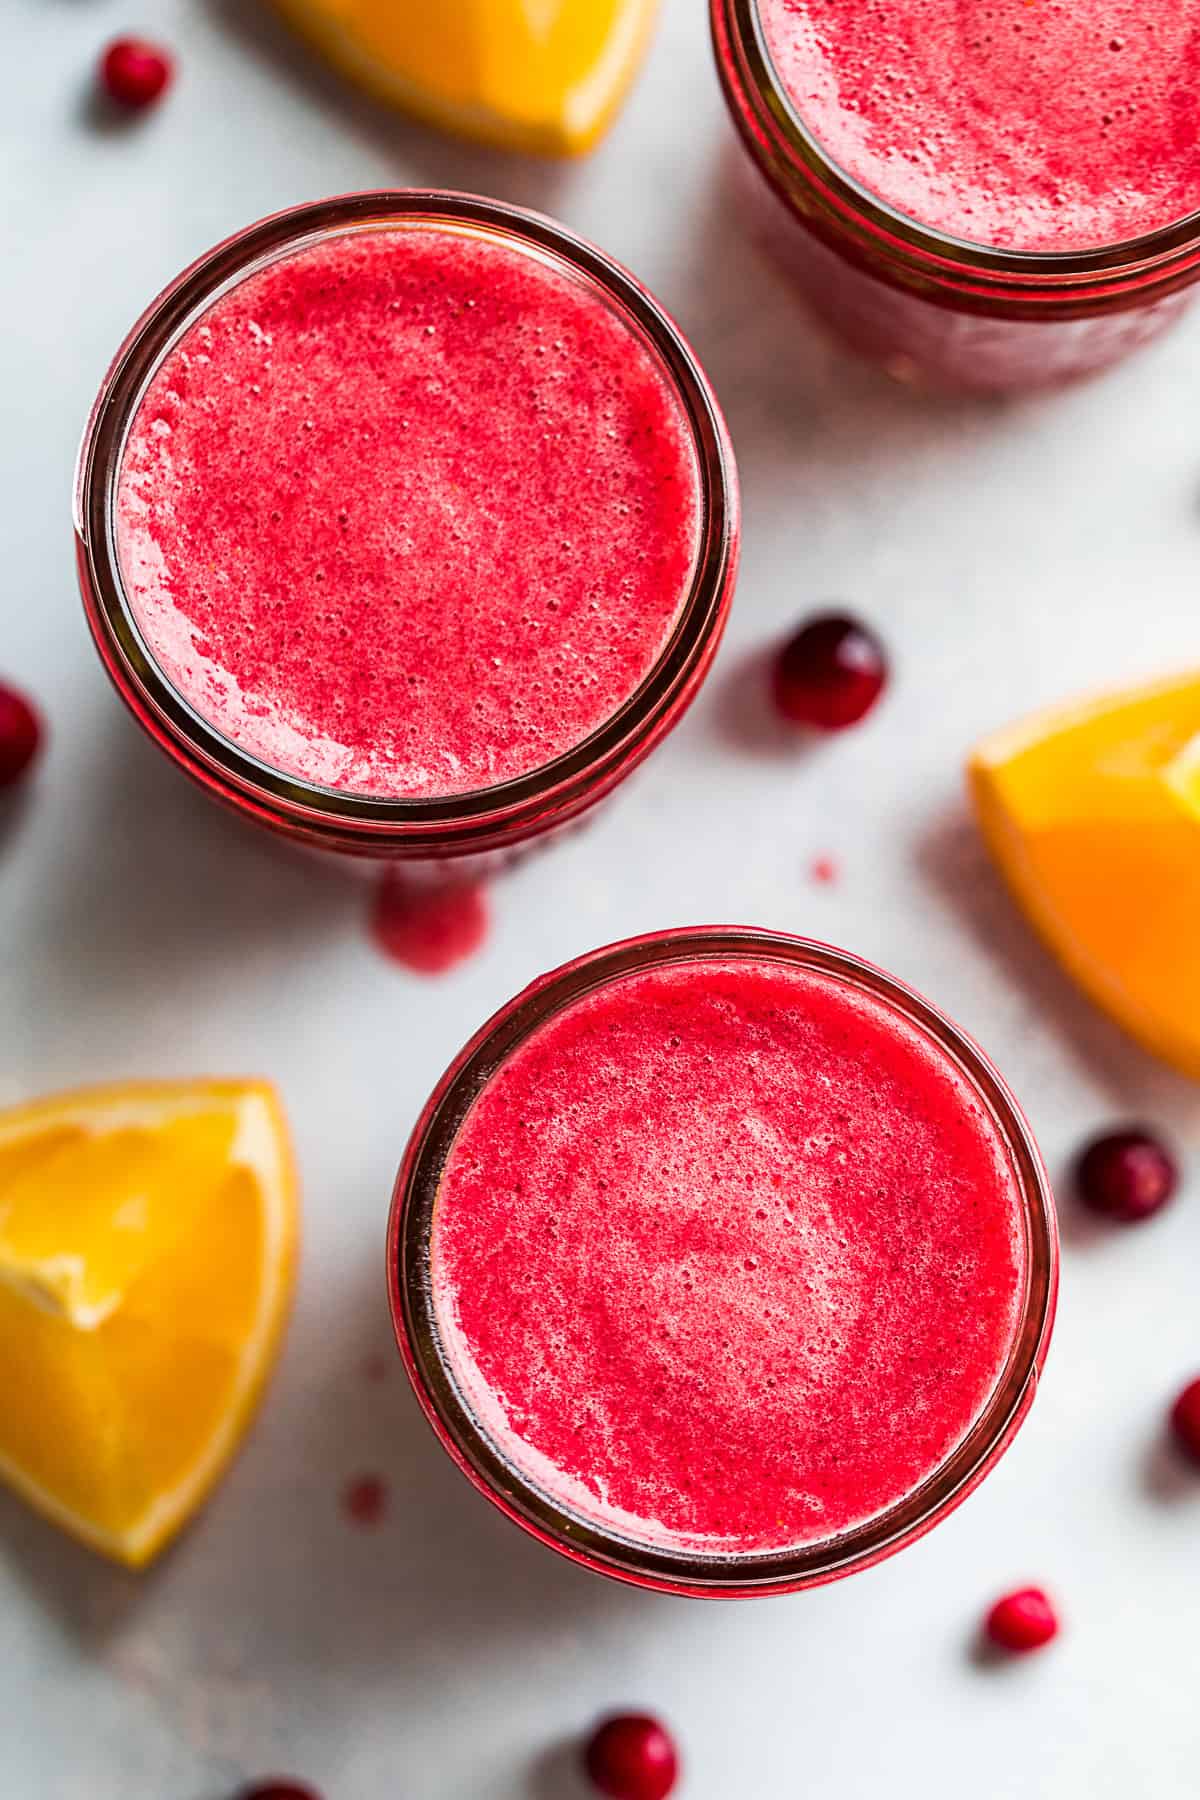 Straight down view of Cranberry Smoothie poured into 3 glasses with cranberries and orange wedges around them.